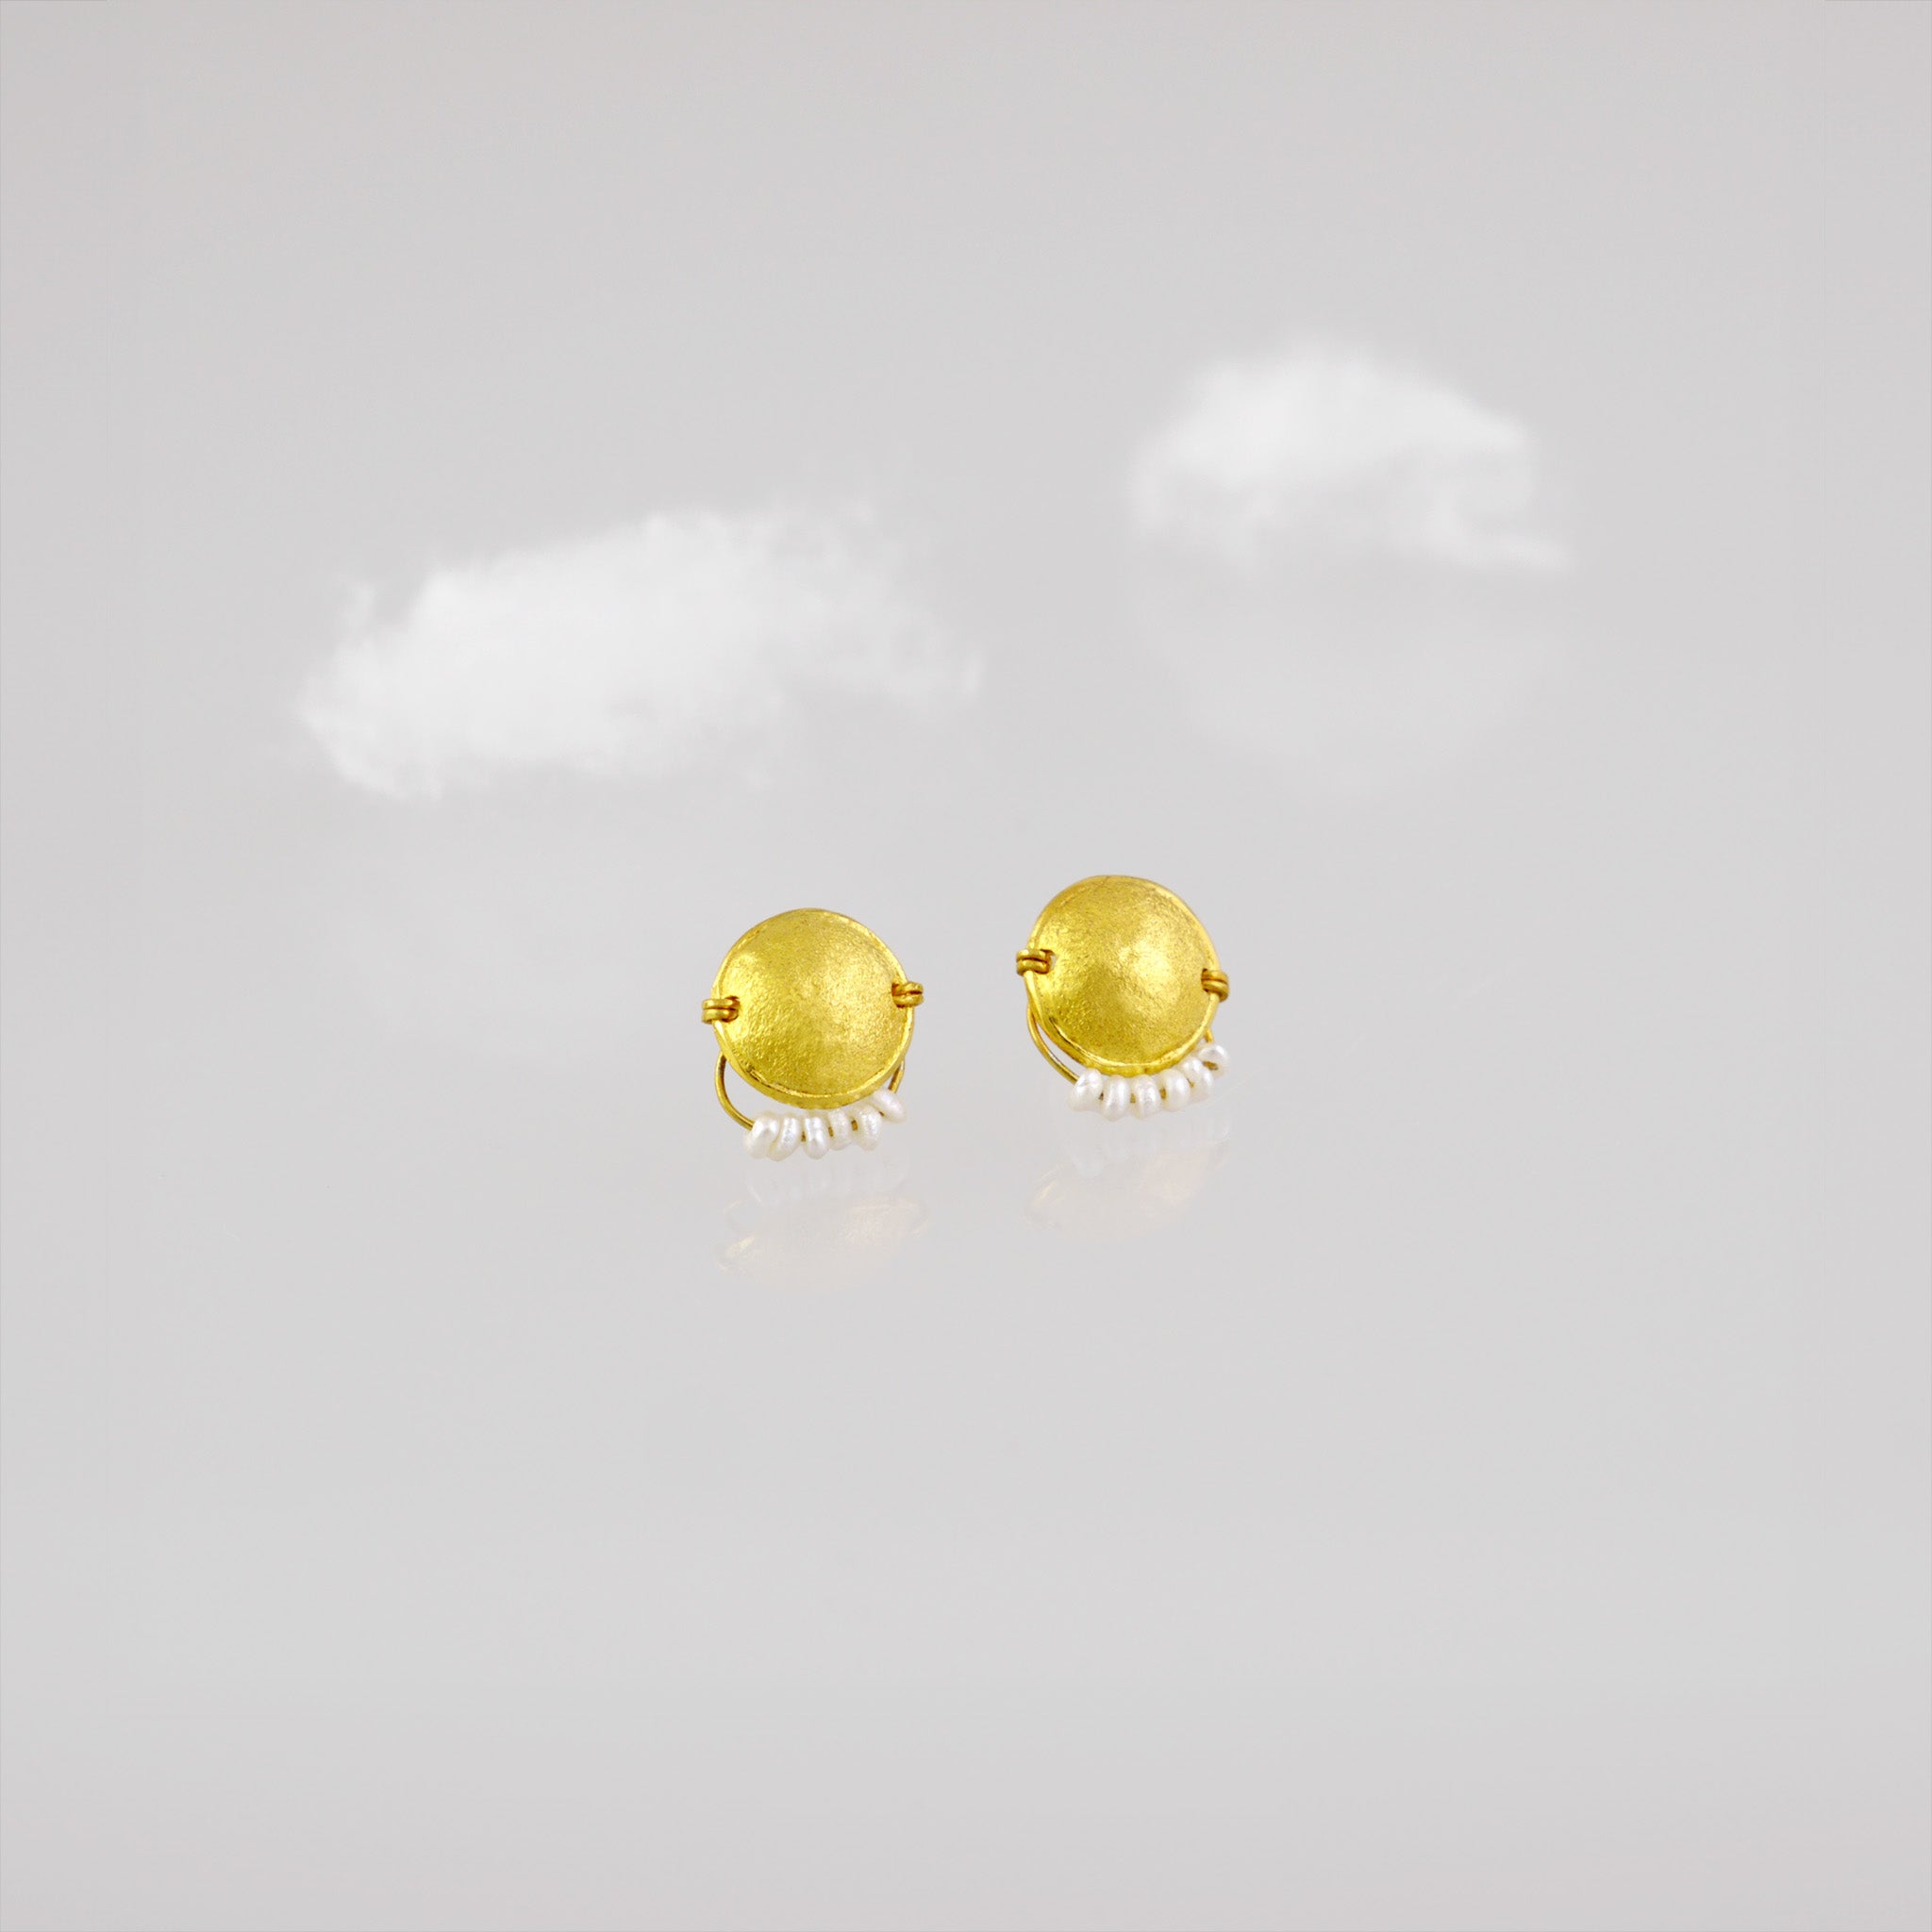 Hand-crafted 18k gold stud earrings with a curved disk design, adorned with a delicate golden thread and tiny pearls hanging from a golden bow.